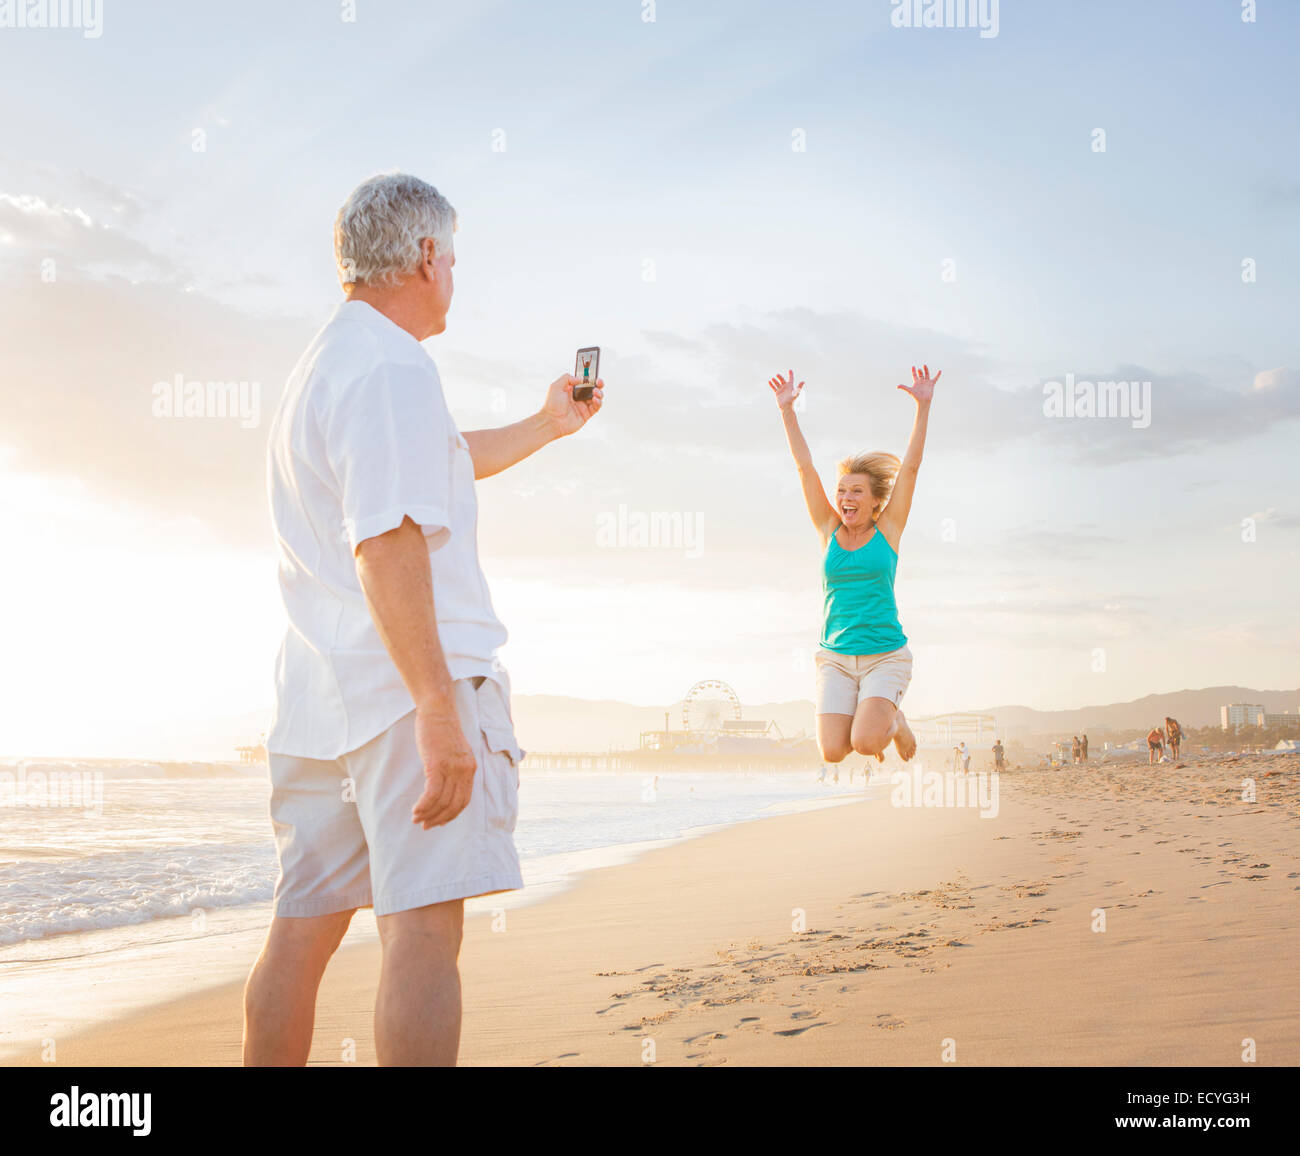 Caucasian man taking cell phone photograph of wife on beach Stock Photo